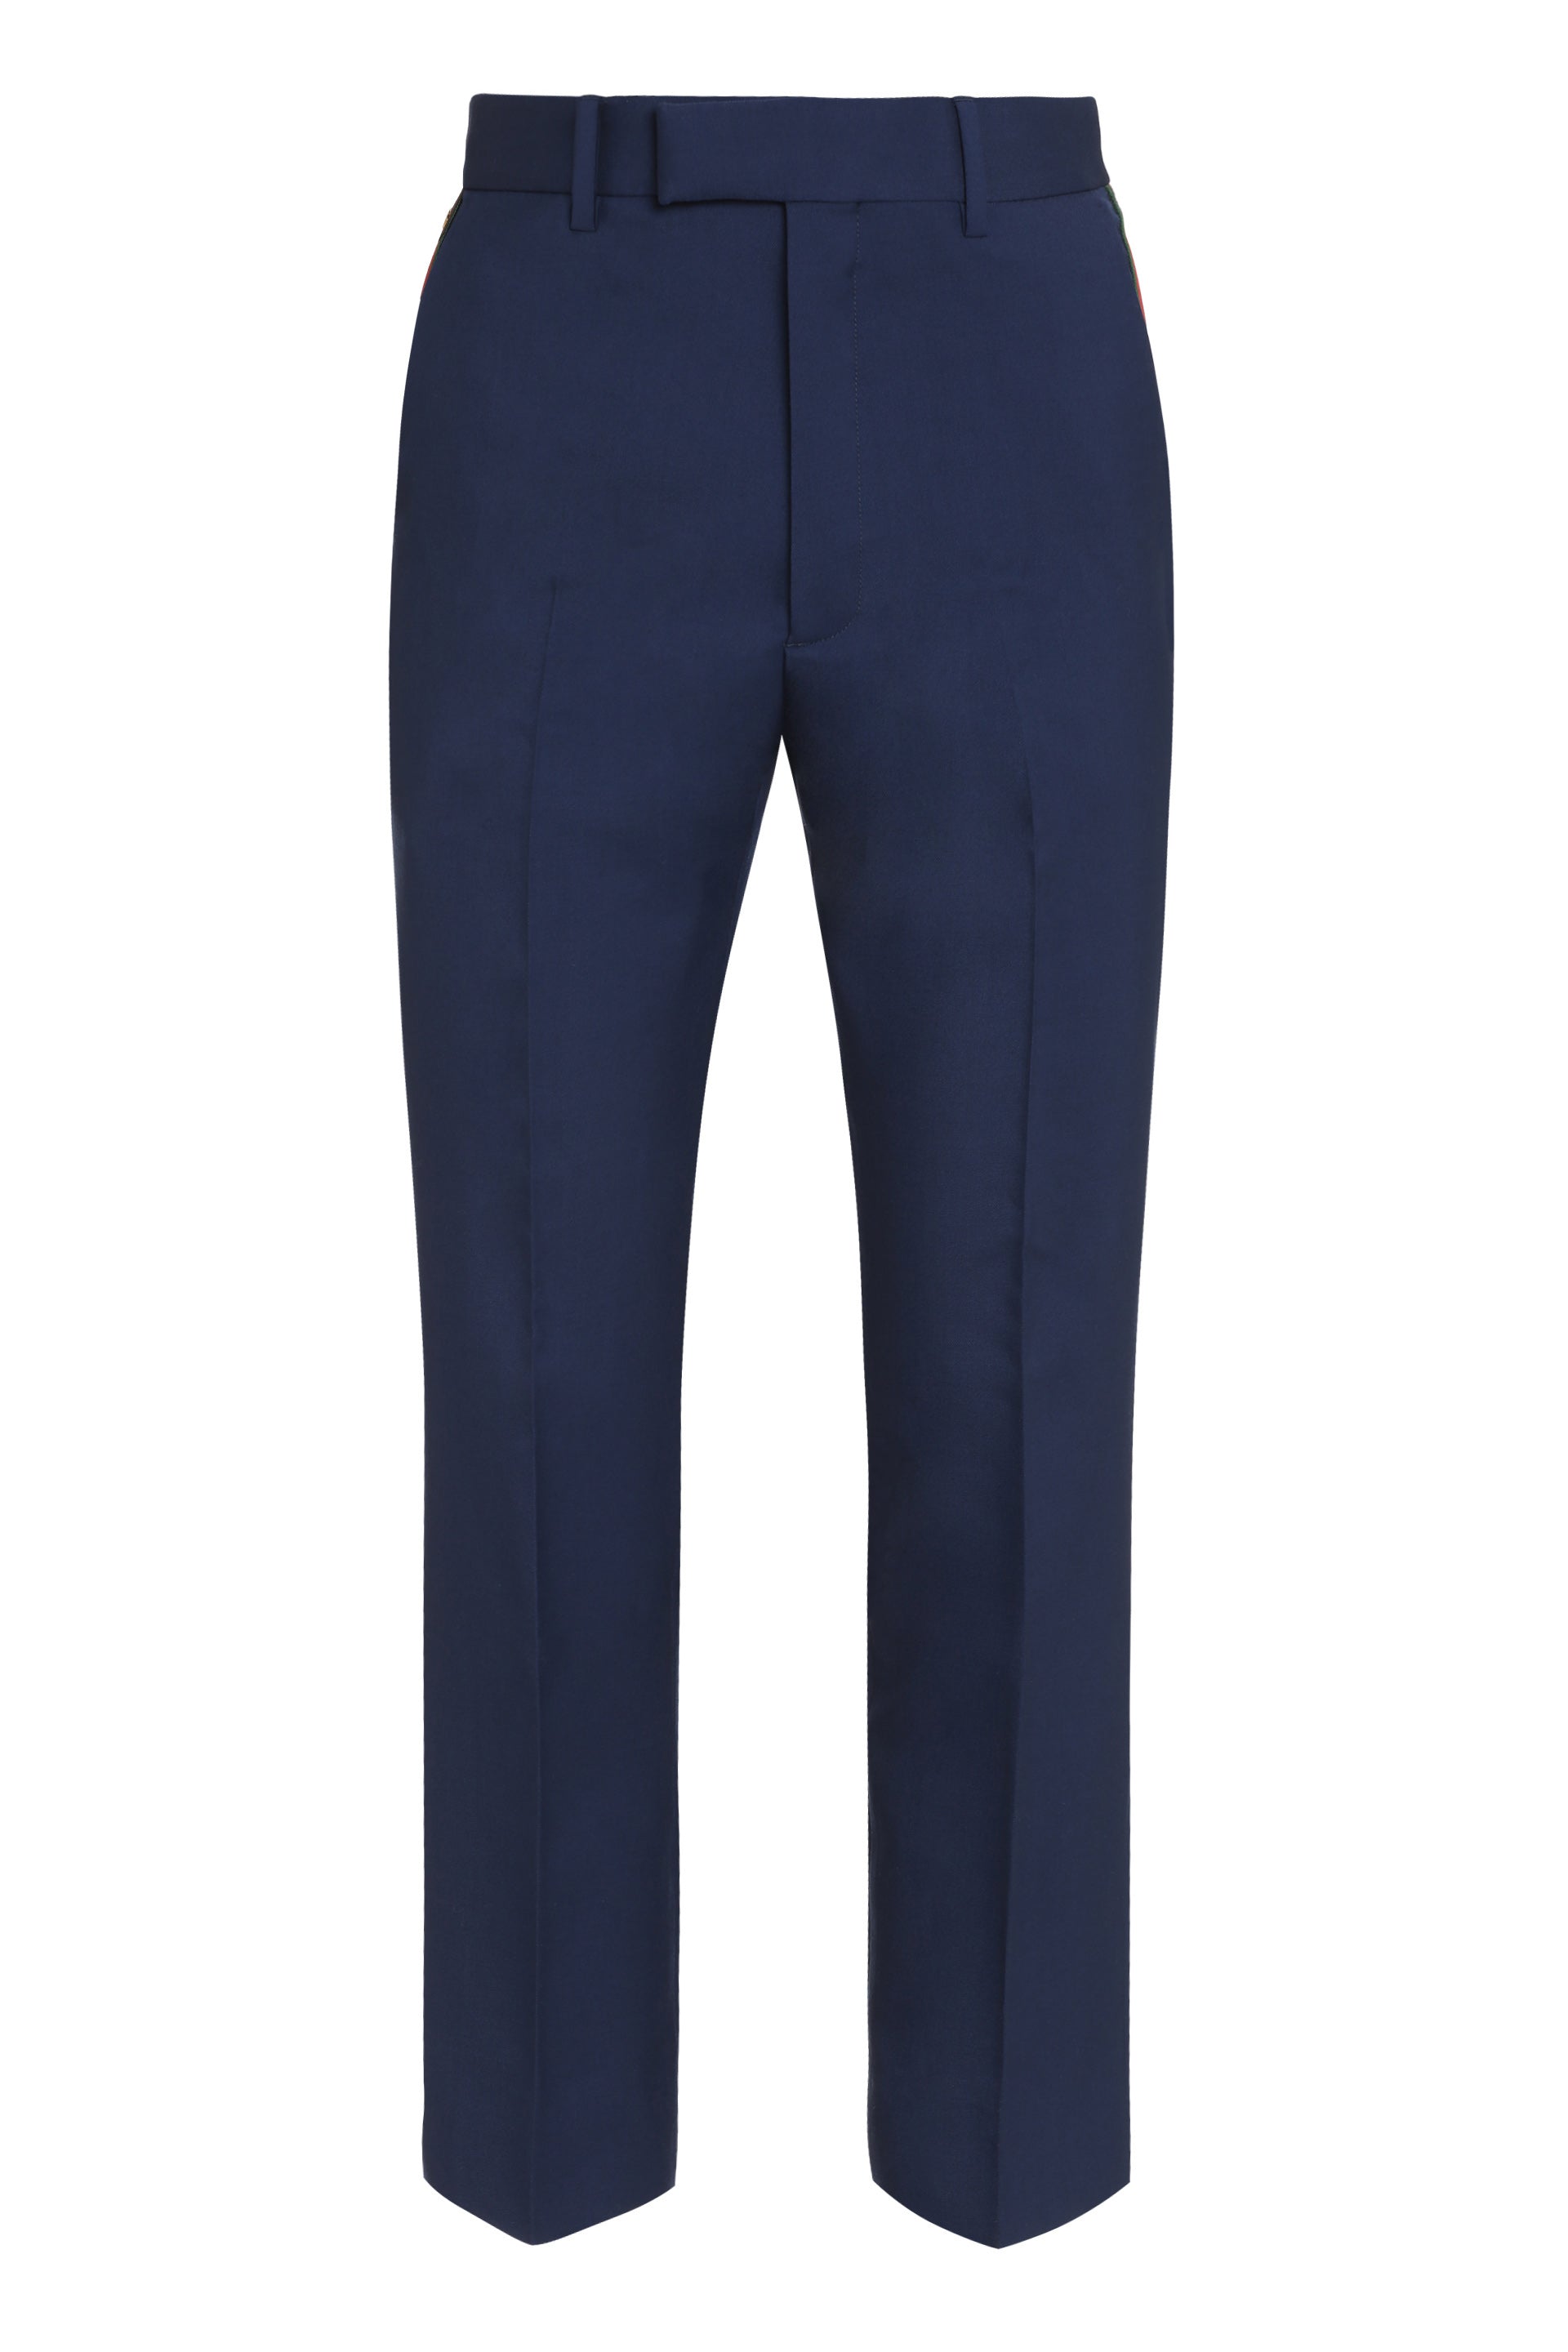 Shop Gucci Men's Blue Wool Blend Trousers With Contrasting Color Side Stripes For Fw22